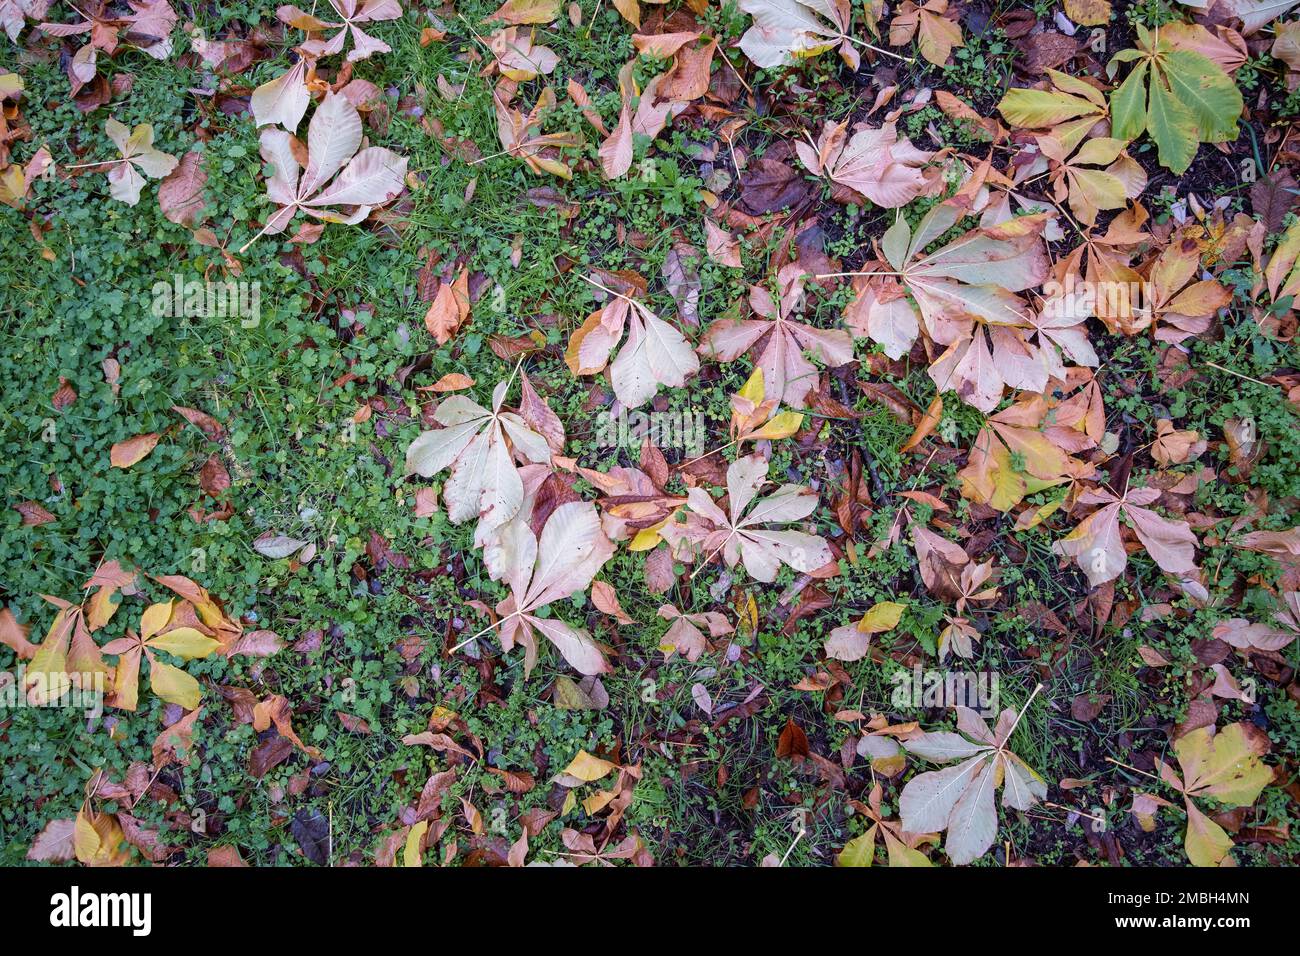 a bed of dry leaves of different types on wet grass, autumn texture, fallen leaves background, horizontal Stock Photo